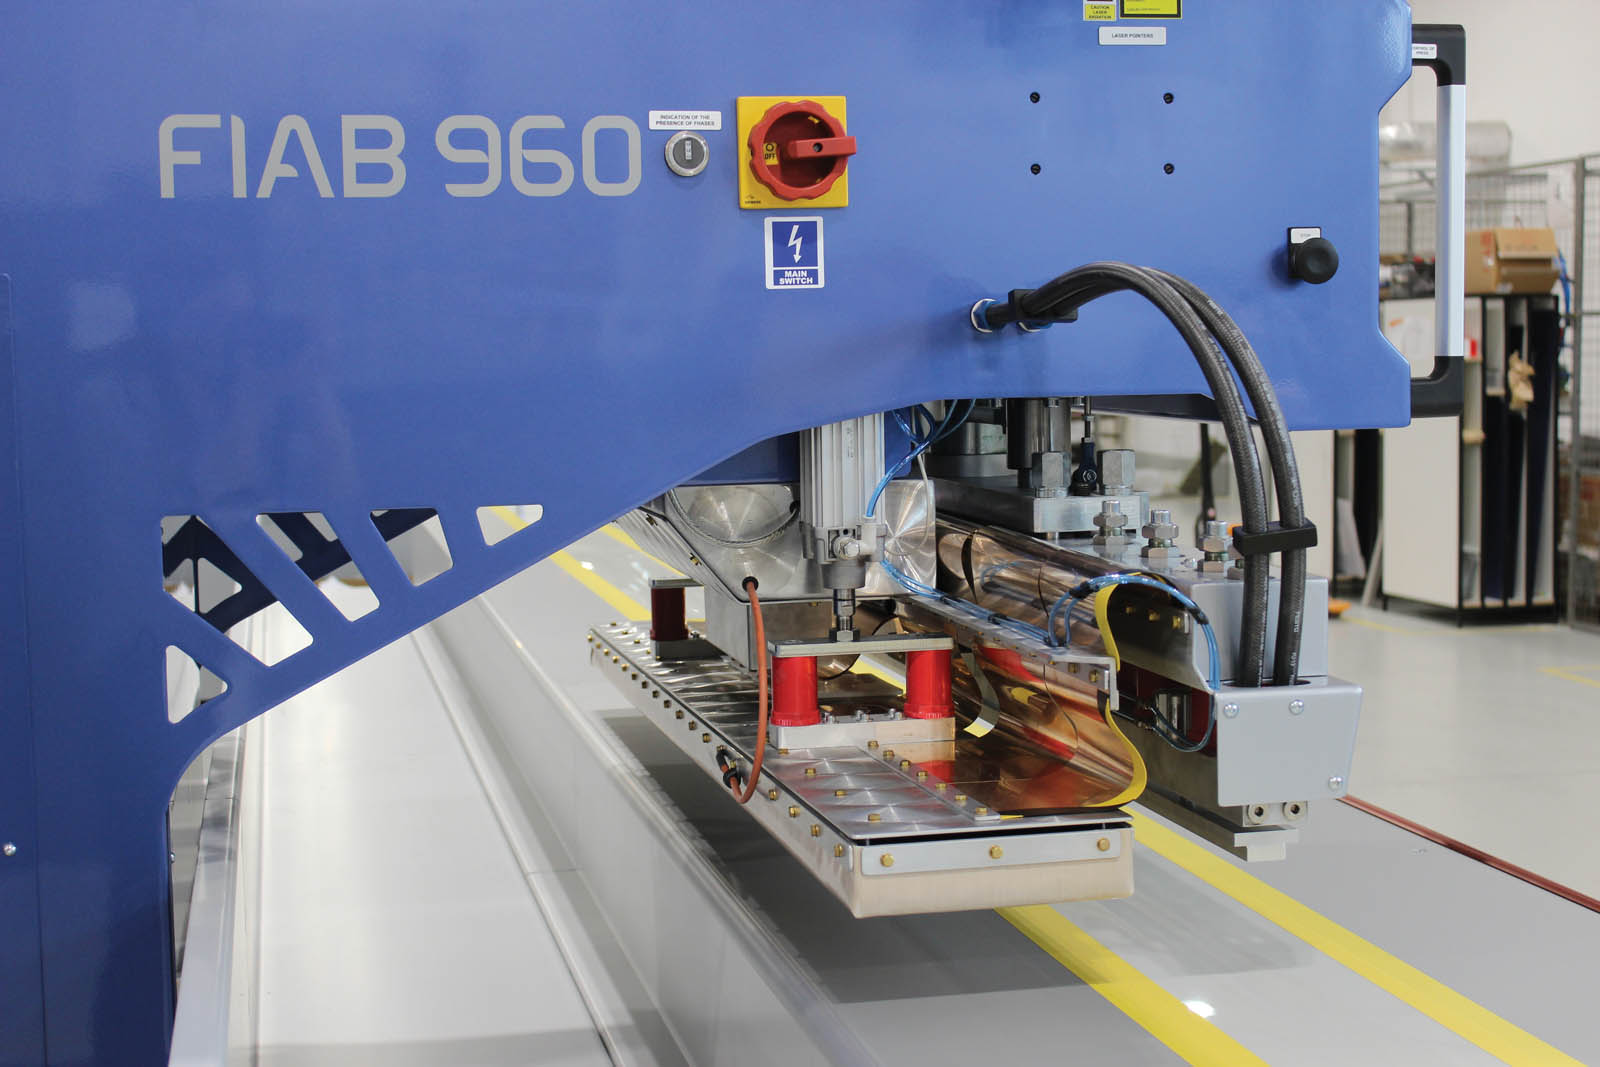 FIAB 960 Traveling Welder for Patio Enclosures Image